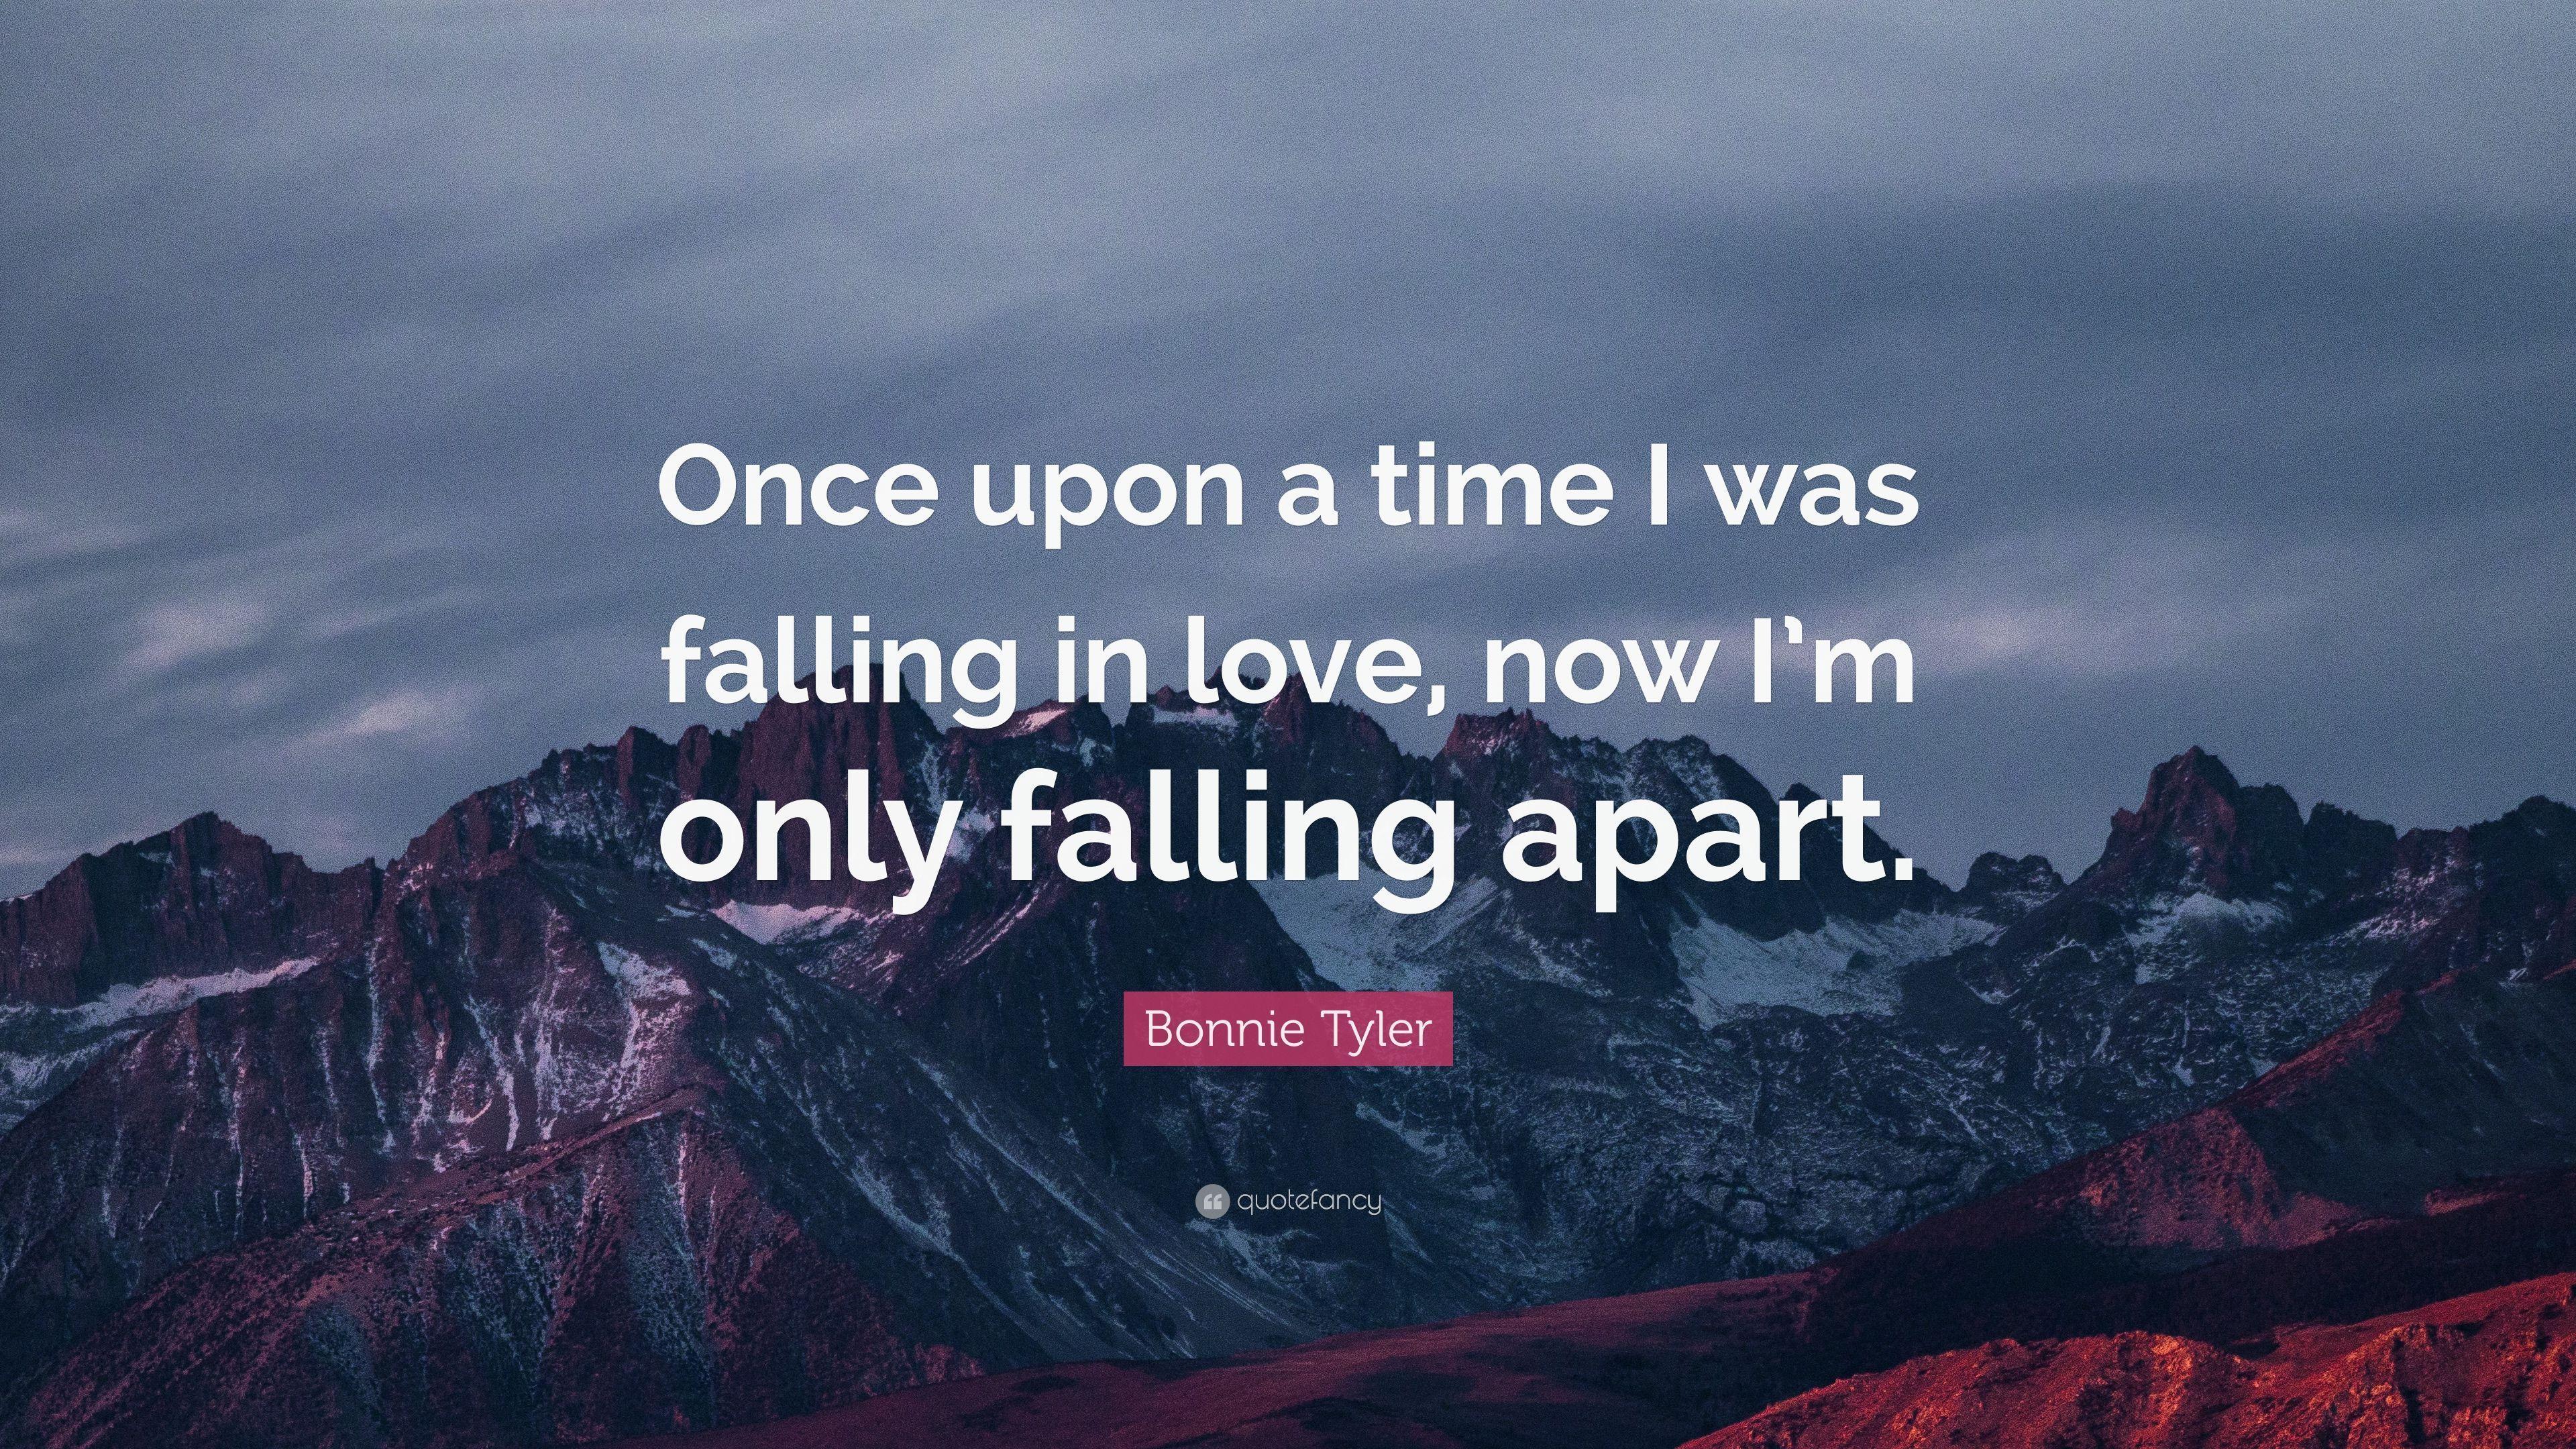 Bonnie Tyler Quote: “Once upon a time I was falling in love, now I'm only falling apart.” (7 wallpaper)